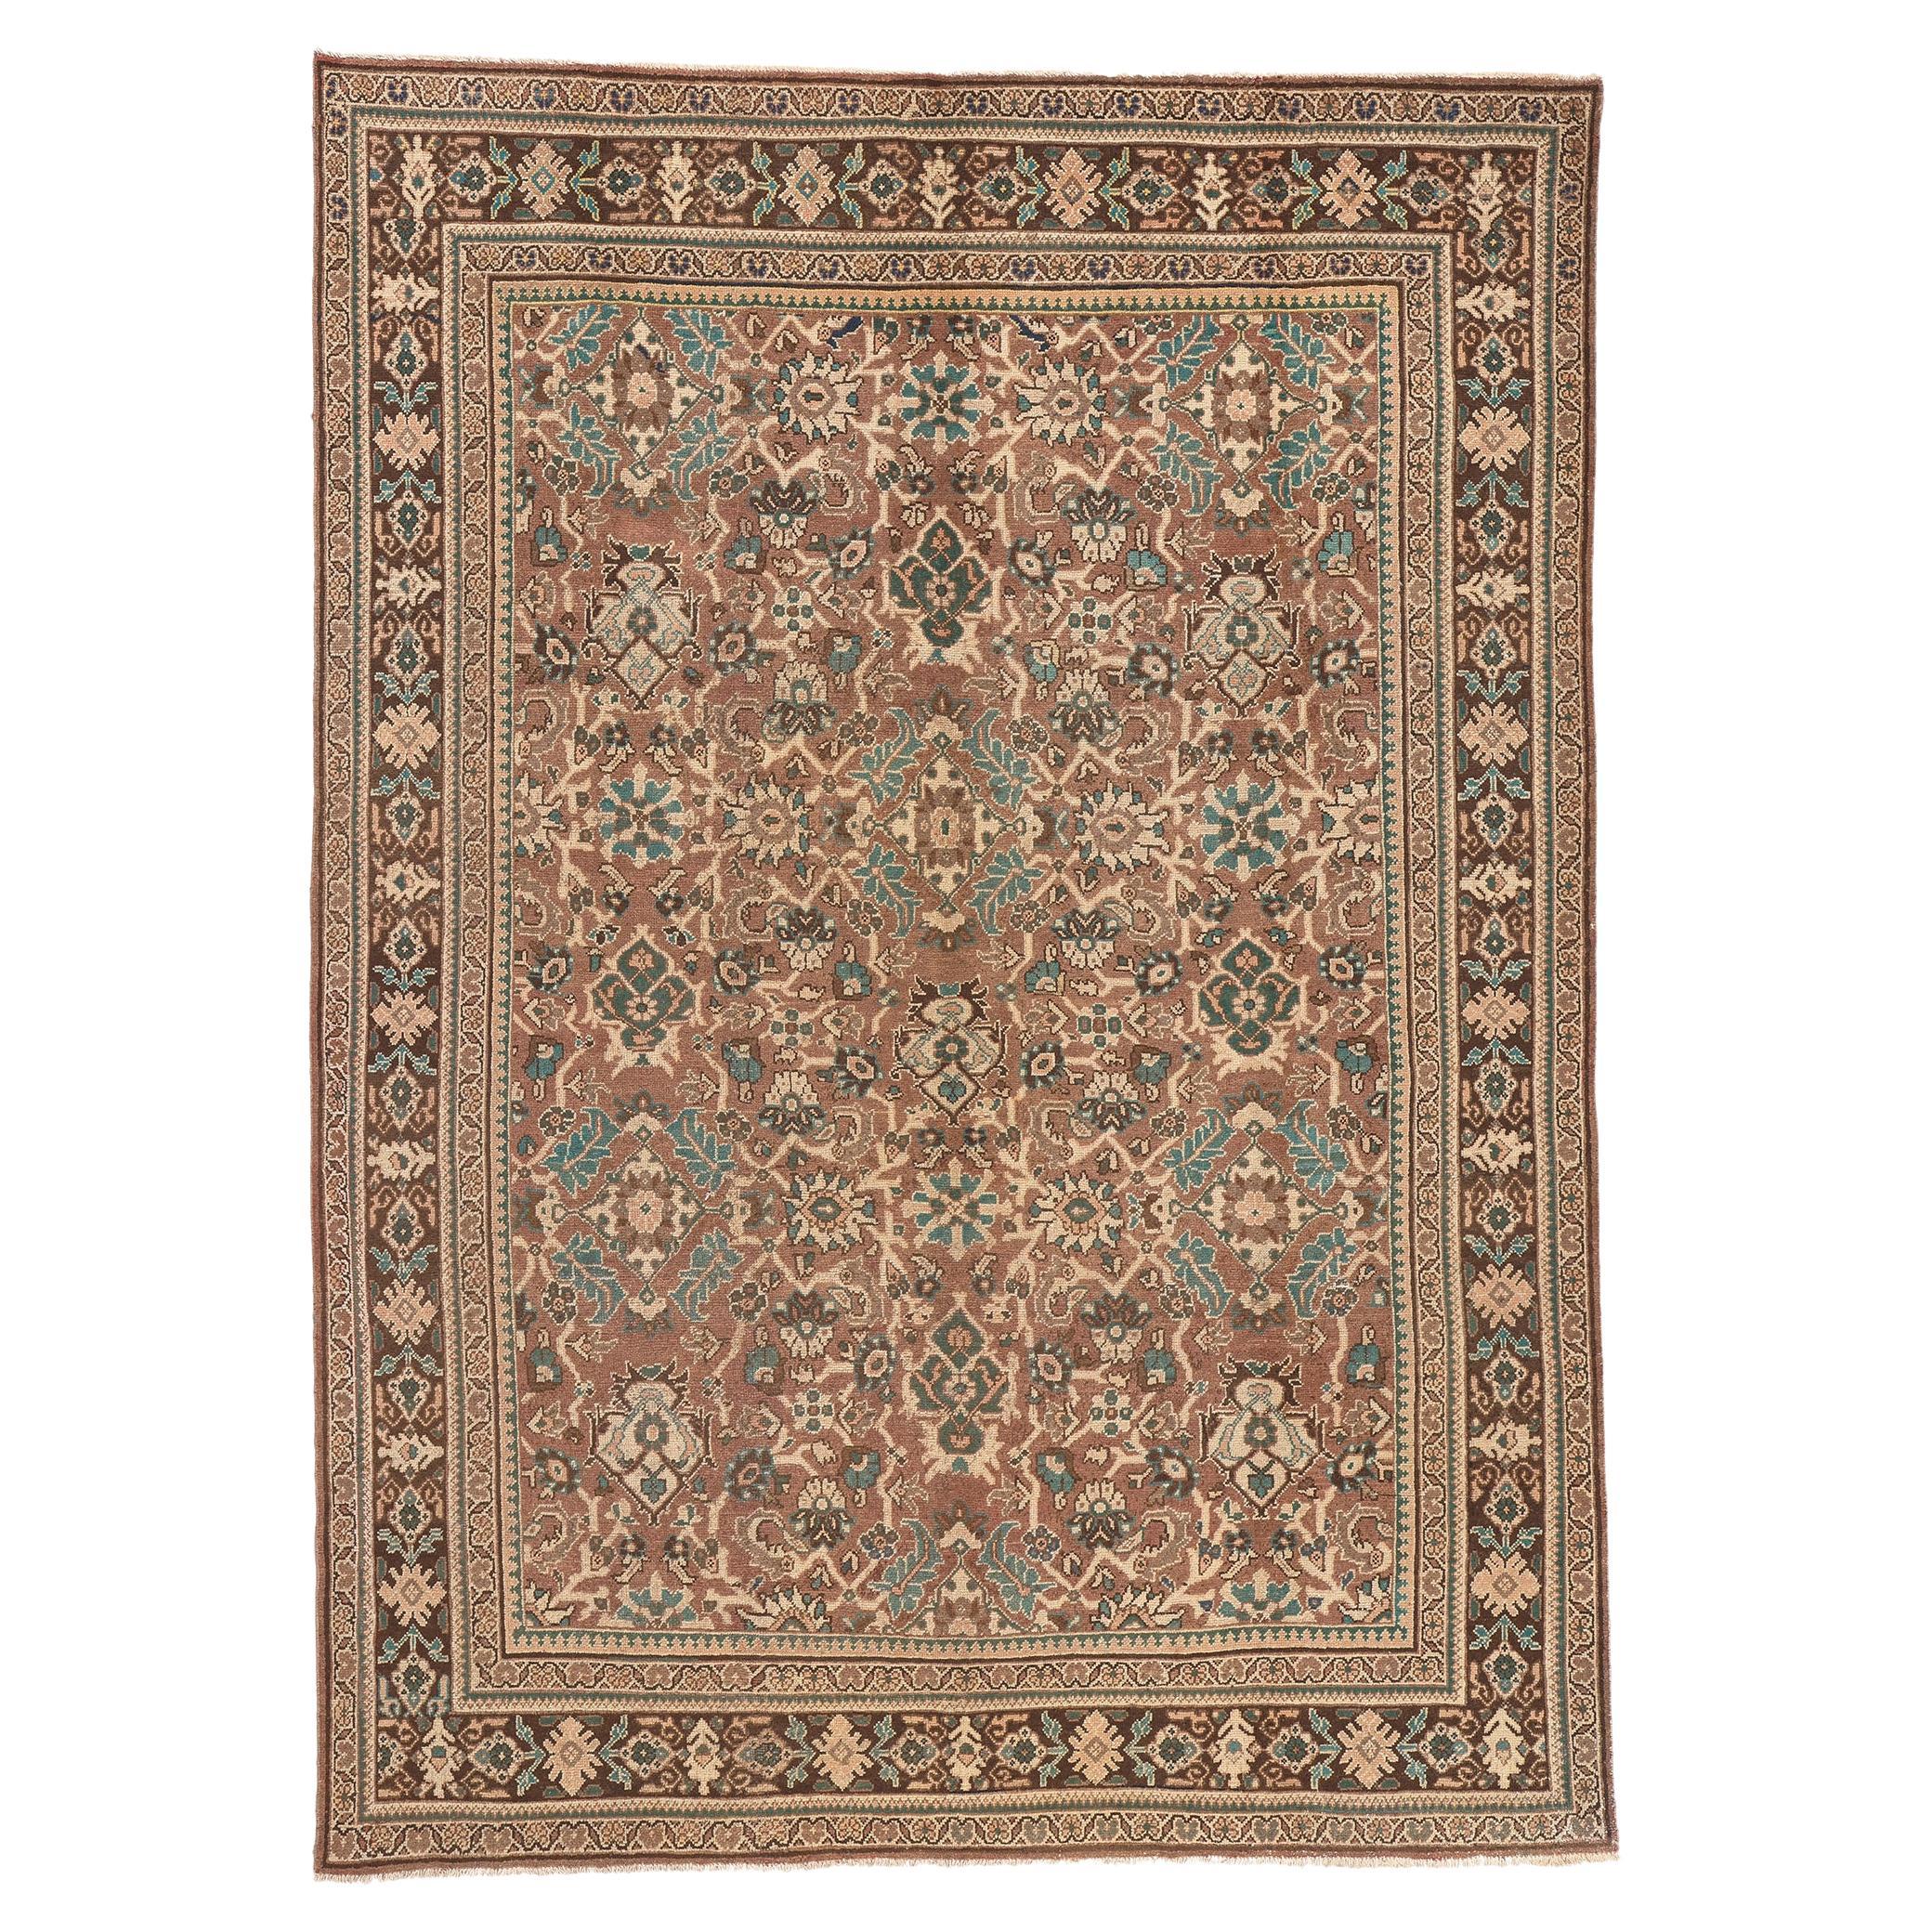 Vintage Persian Mahal Rug with Traditional Style